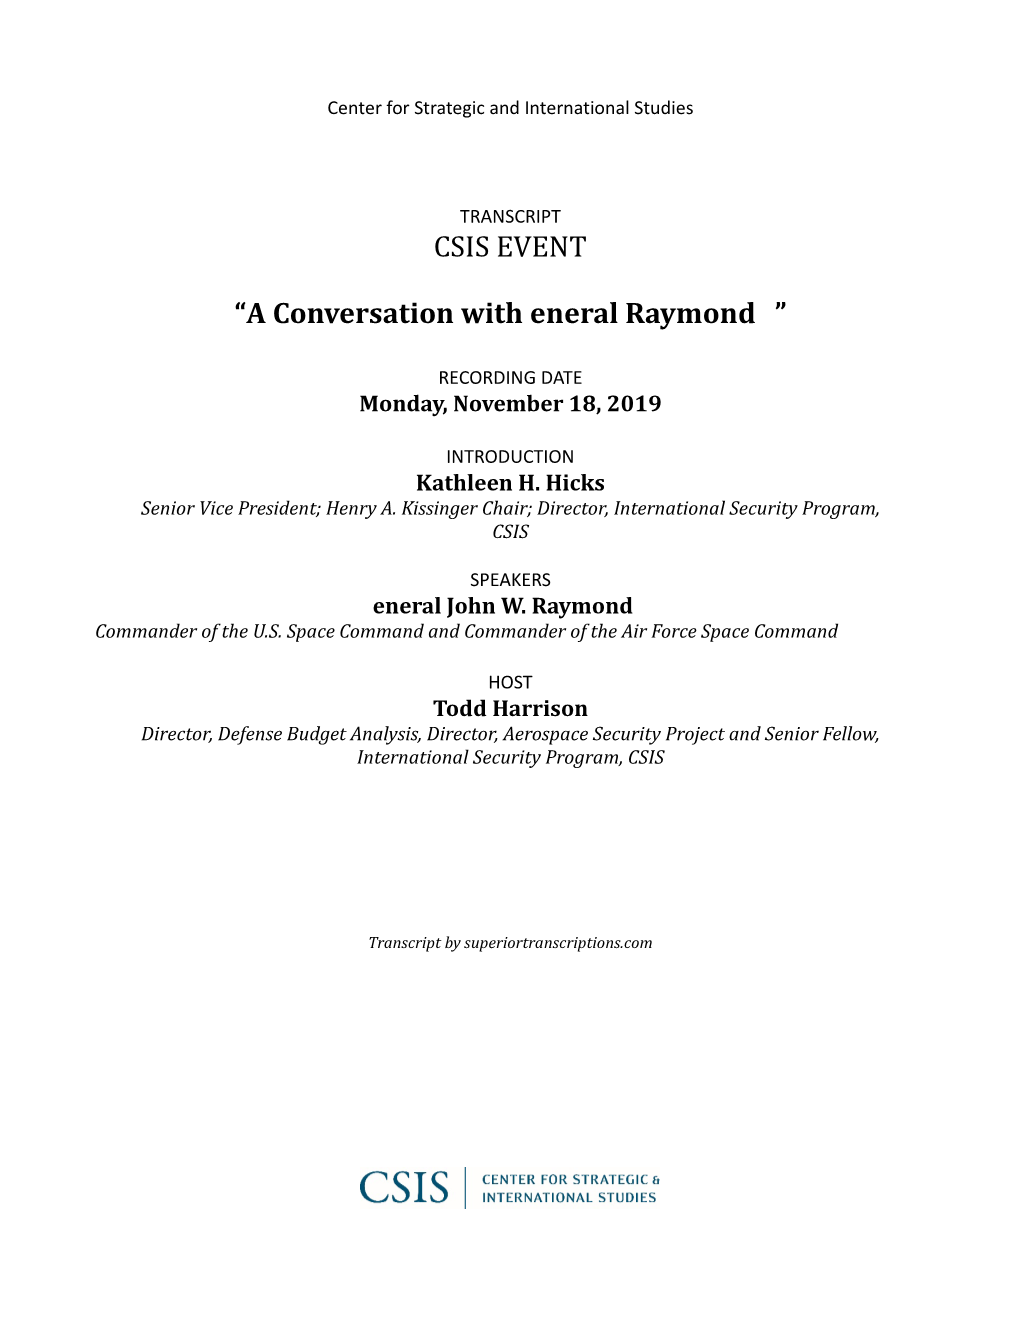 CSIS EVENT “A Conversation with Eneral Raymond ”